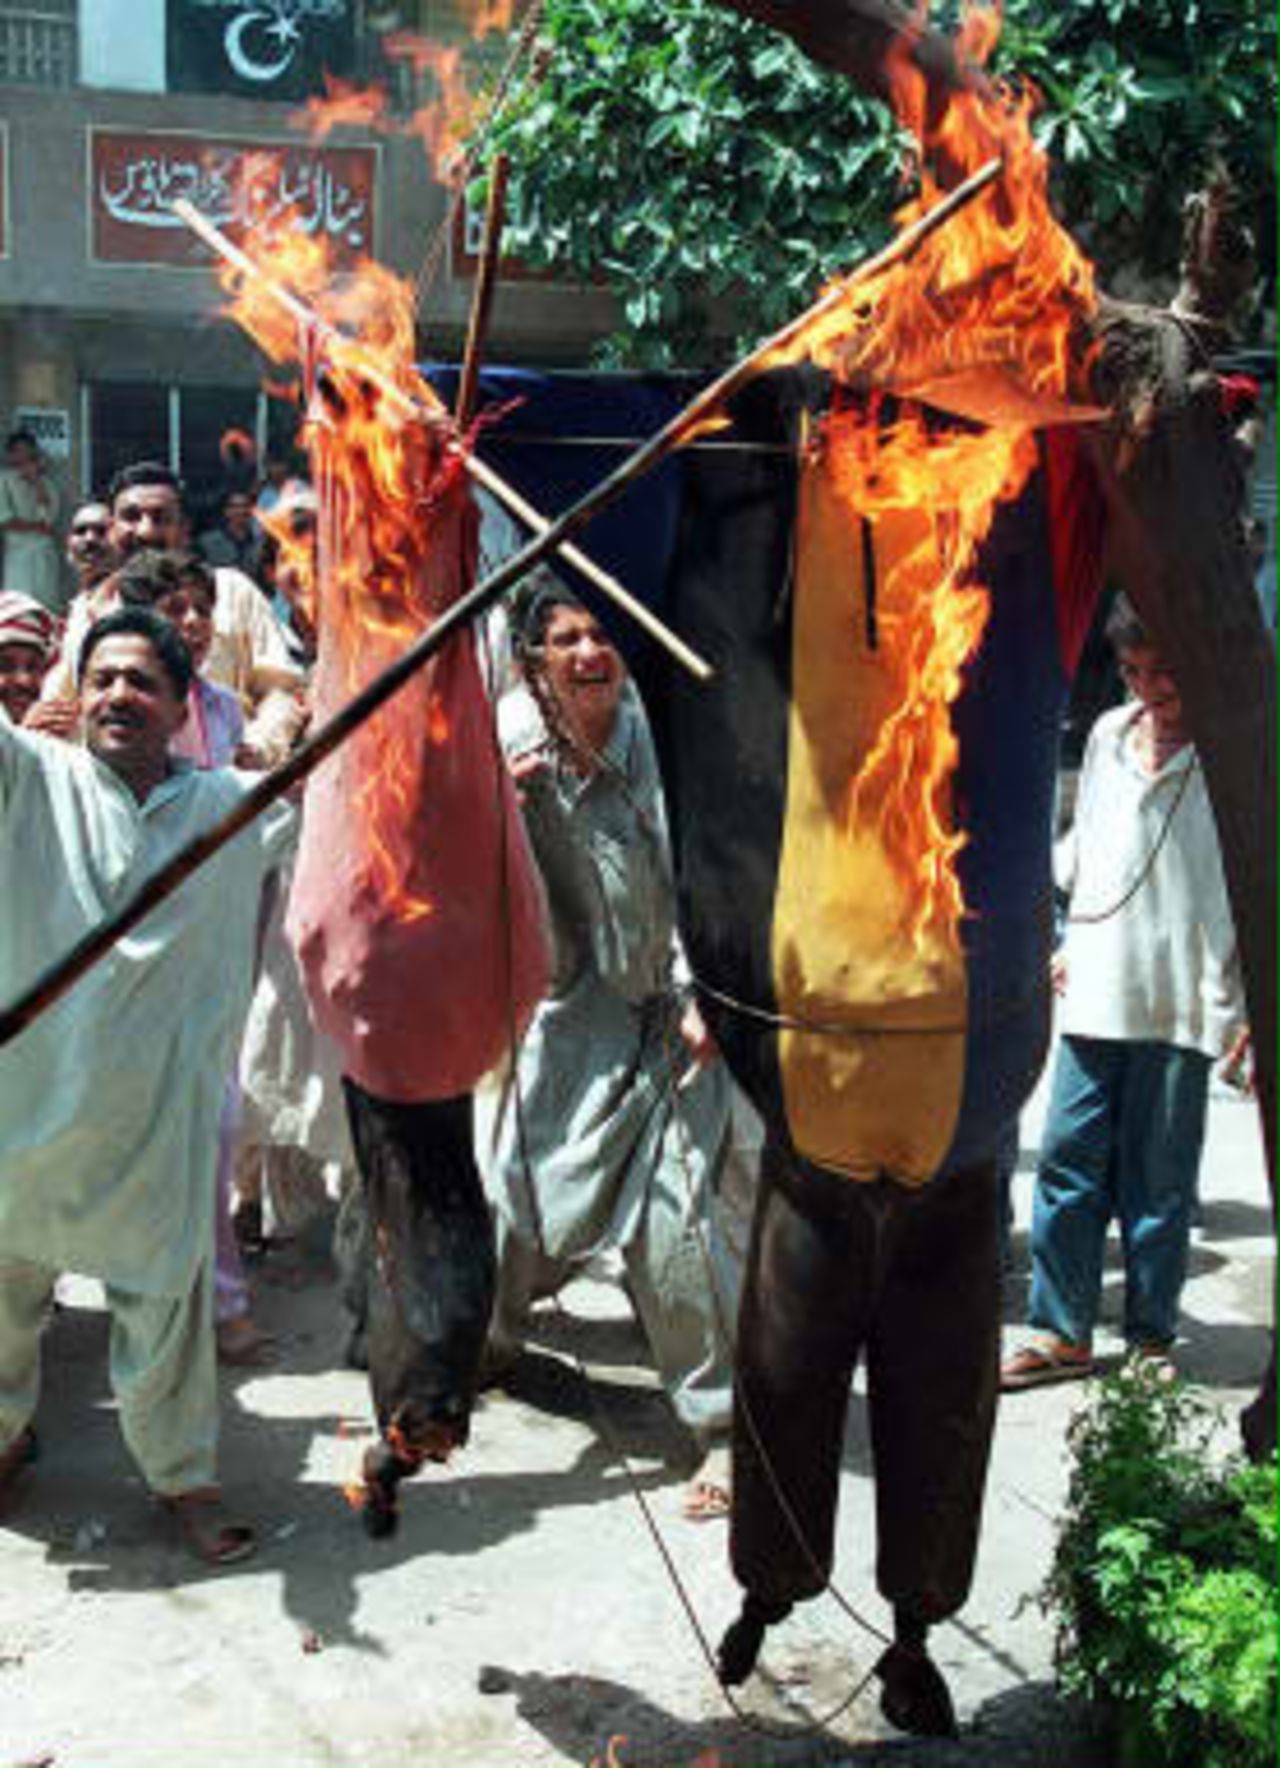 Angry protestors burn effigies of Pakistan cricket team captain Wasim Akram and vice captain Moin Khan in Lahore to express their anger over the humiliating  defeat by Australia in the World Cup final at Lords, in Lahore 22 June 1999.